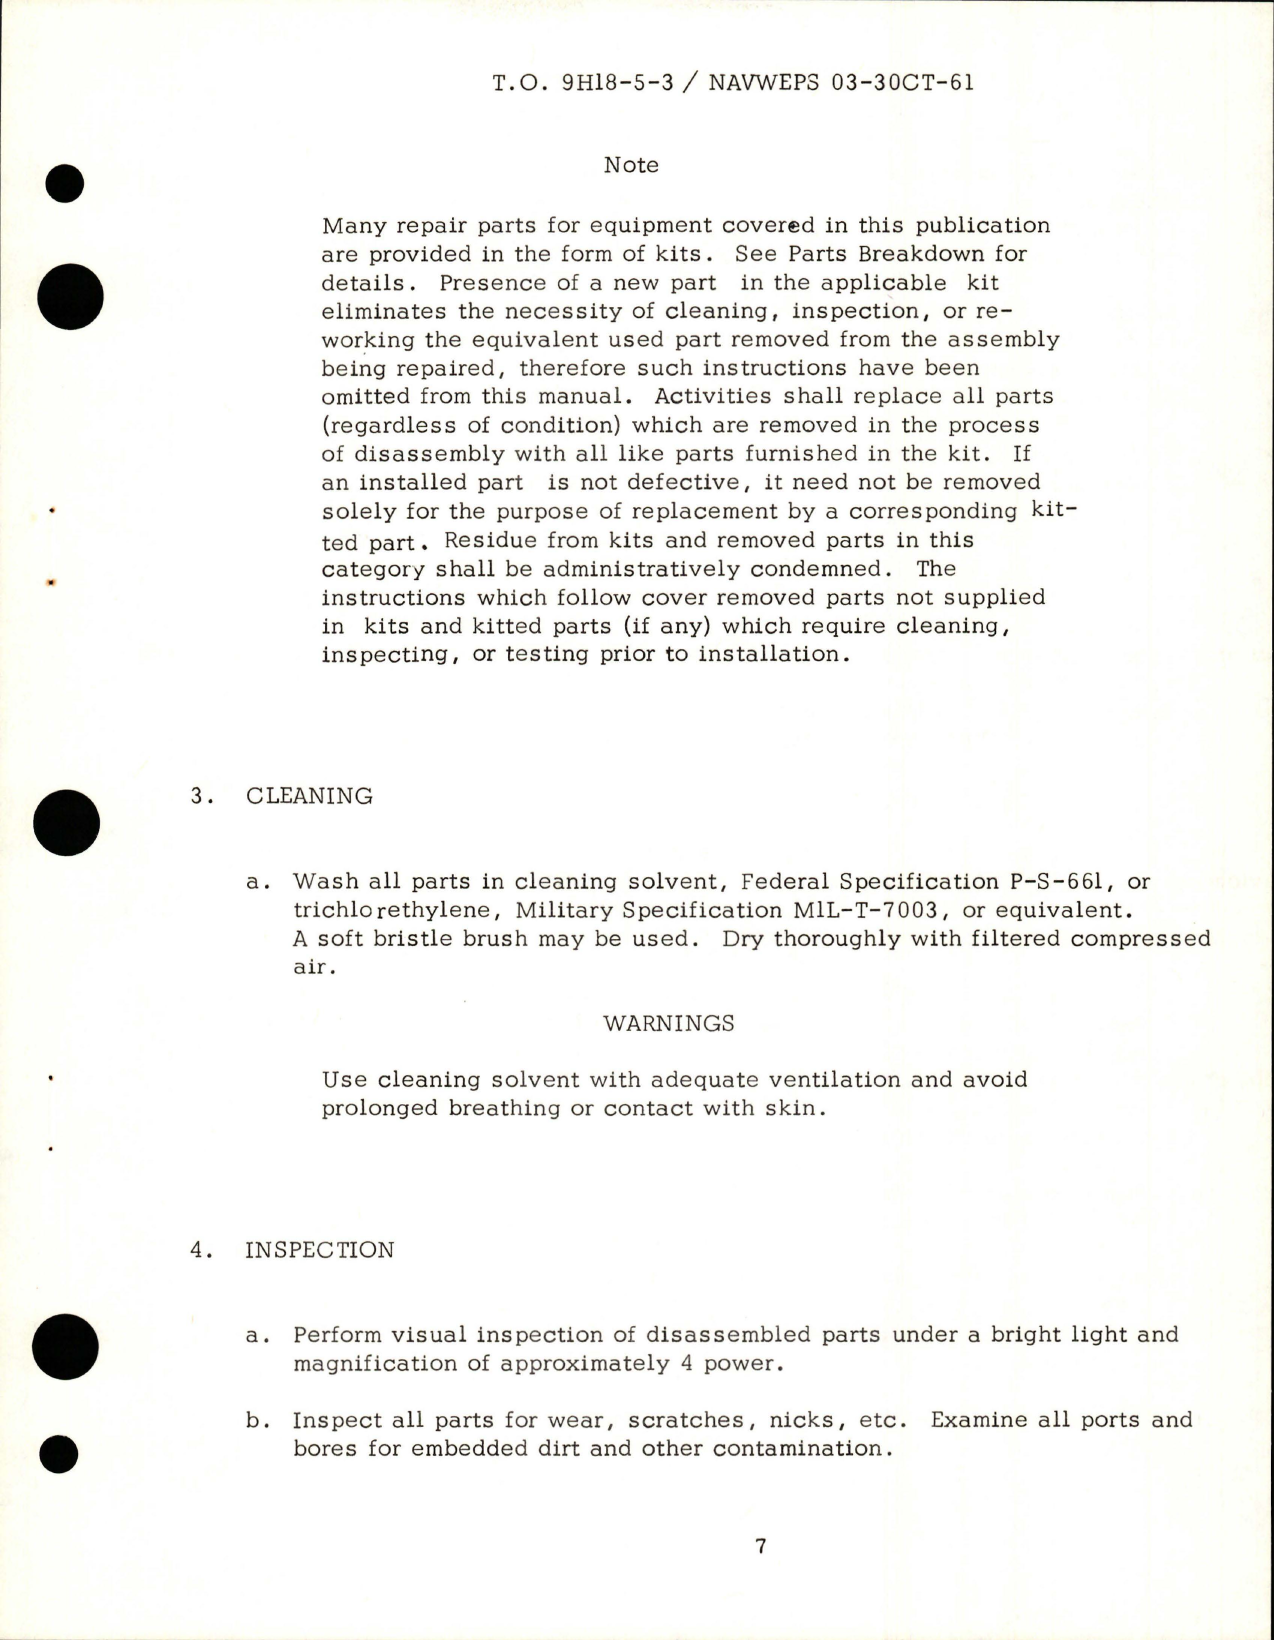 Sample page 7 from AirCorps Library document: Overhaul Instructions with Parts for Manifold Assembly w Pressure Relief and Check HYD - Parts 7A045-1 and 7A045-2